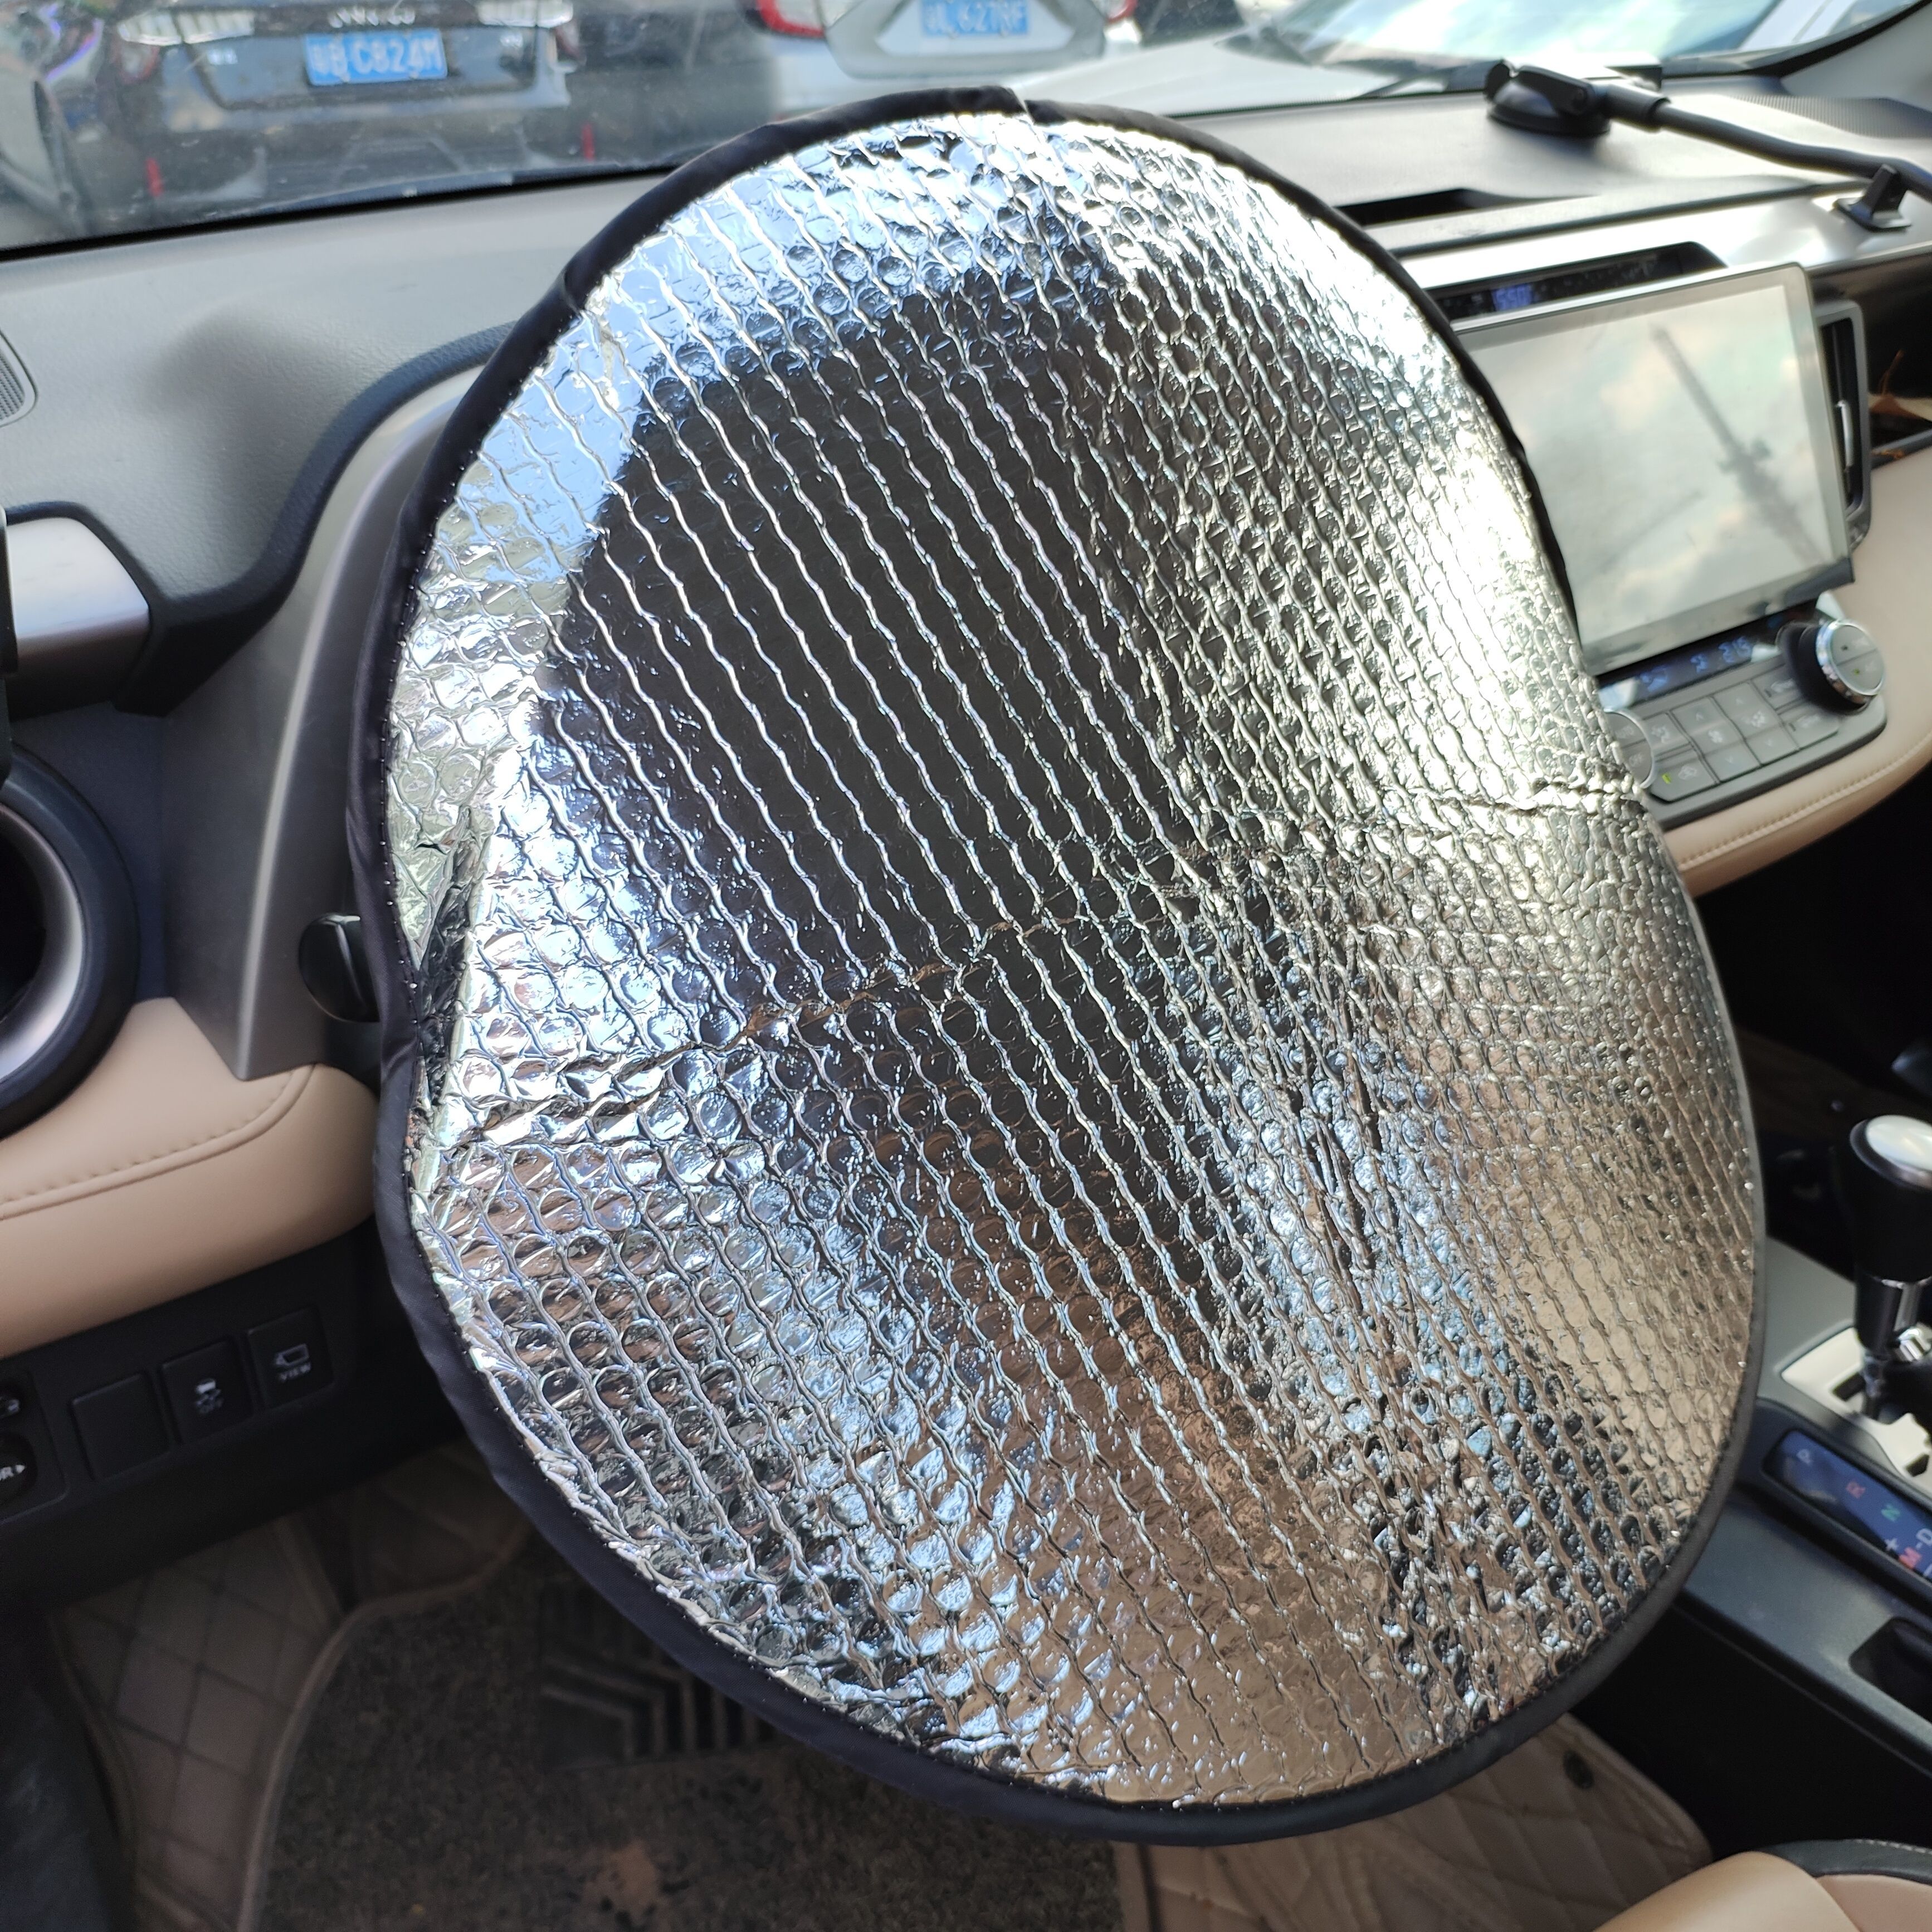 

Keep Your Car Cool & Protected - Steering Wheel Sun Shade Cover Fits All Suvs, Trucks & Cars